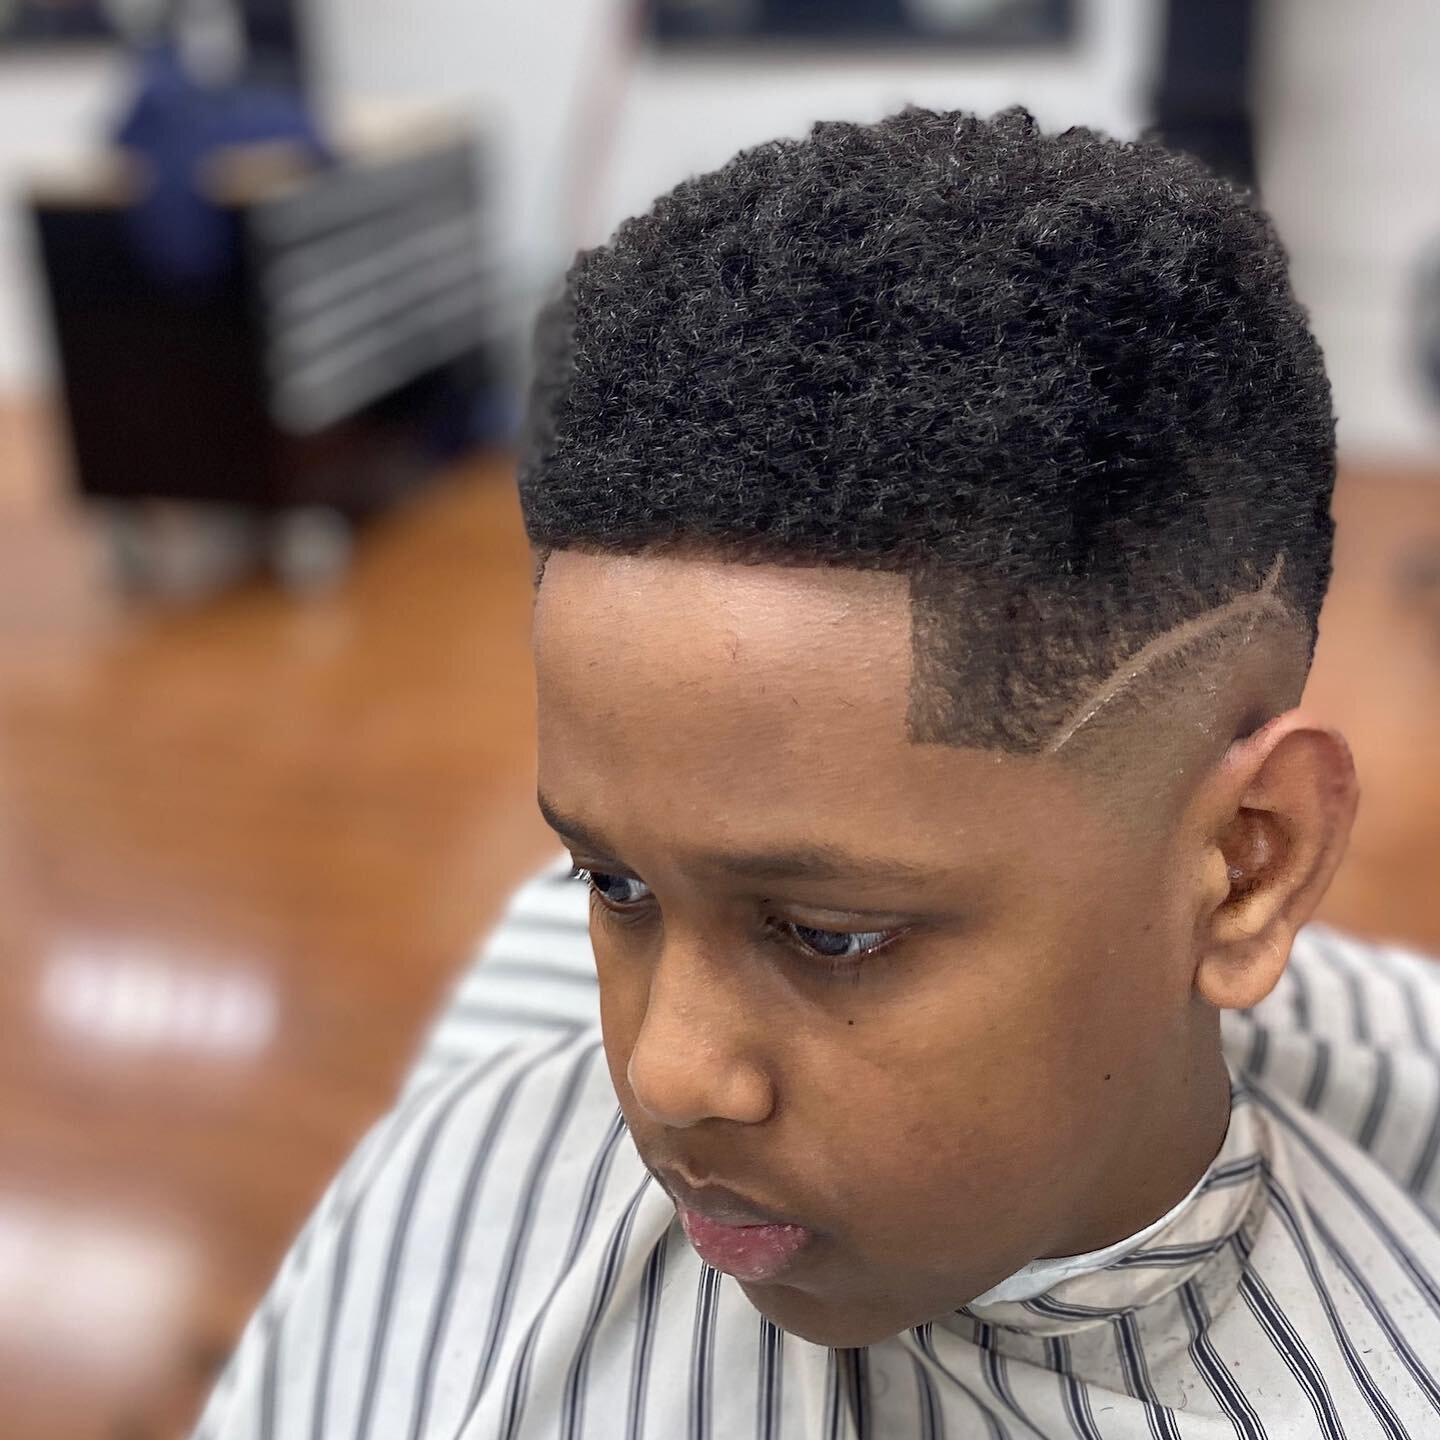 👑 Young King with the crispy + curly. 
✂️ Cut by : Dubb
💈Book online! Hit the link in the bio!
.
.
.
.
.
.
#minnesotabarbers #ultimatebarber #midwestbarbers #crispylineup #blackboys #barberlife #barber #barbershop #stayhandsome #barbershopconnect #